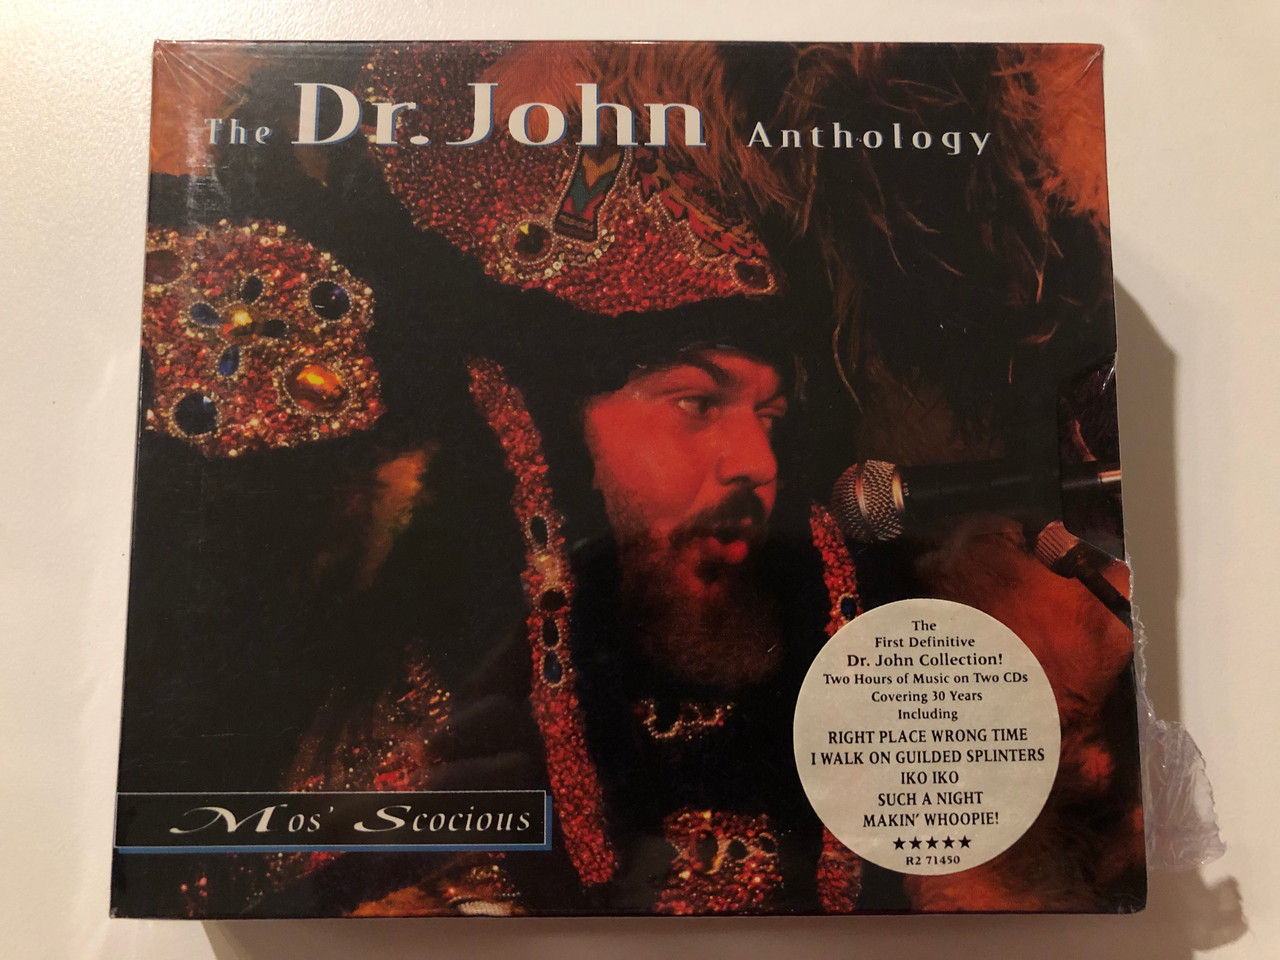 https://cdn10.bigcommerce.com/s-62bdpkt7pb/products/0/images/221383/The_Dr._John_Anthology_-_Mos_Scocious_Two_Hours_of_Music_on_Two_CDs_Covering_30_Years_Including_Right_Place_Wrong_Time_I_Walk_On_Guilded_Splinters_Iko_Iko_Such_A_Night_Rhino_Reco_1__94974.1649767992.1280.1280.JPG?c=2&_gl=1*1bukwsg*_ga*MjA2NTIxMjE2MC4xNTkwNTEyNTMy*_ga_WS2VZYPC6G*MTY0OTc2NzAzNy4zNTQuMS4xNjQ5NzY3OTcyLjYw